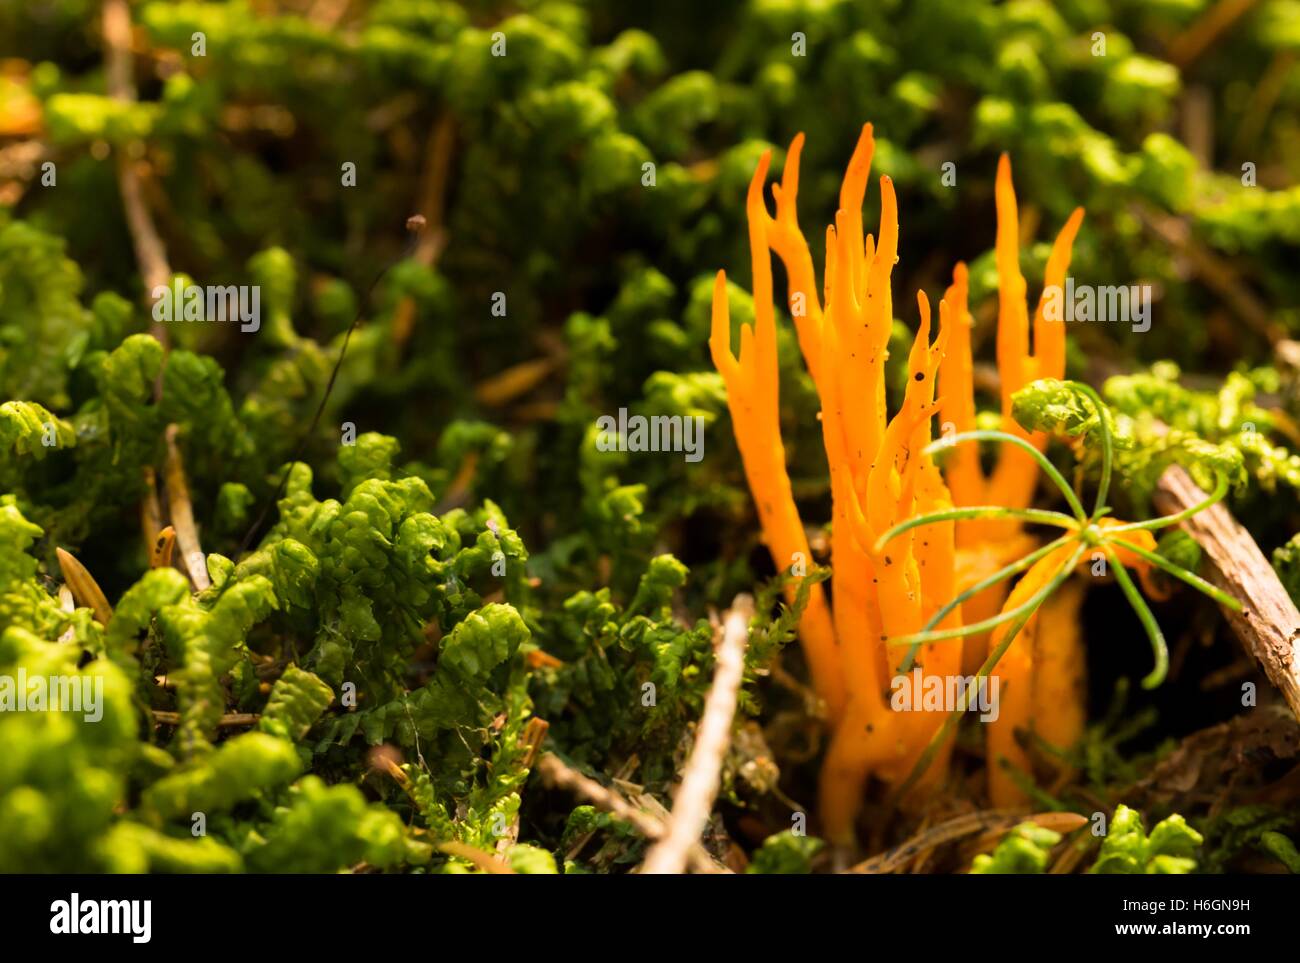 Horizontal photo of nice bright orange ramaria mushrooms which are growing in fresh green moss. Mushroom is placed in woods with Stock Photo